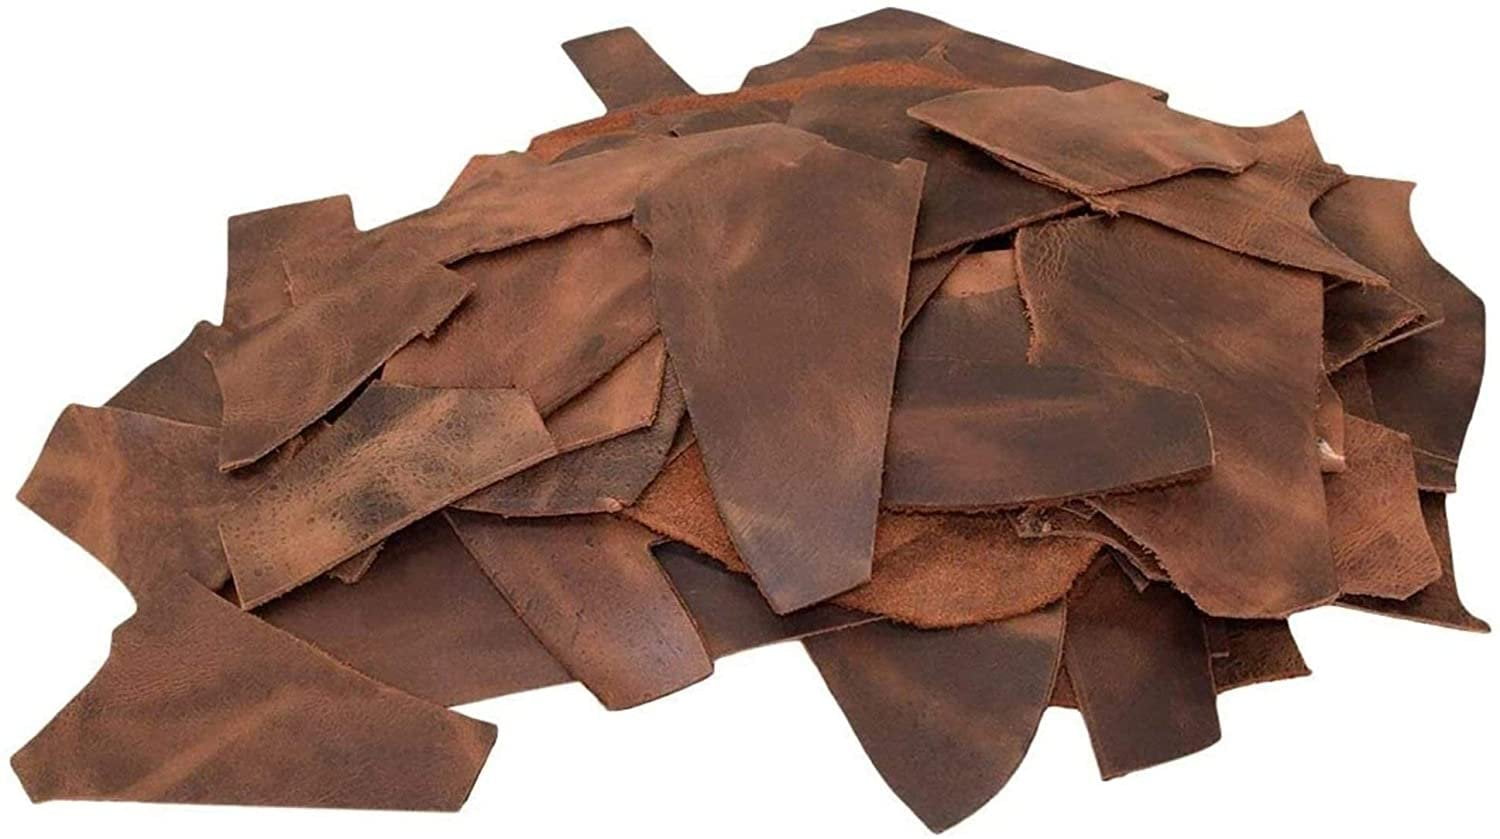 ELW Oil & Vegetable Tanned Leather Scraps - Cowhide Remnants Full Grain &  Latigo Leather for Tooling, Holsters, Knife Sheath, Carving, Embossing,  Stamping